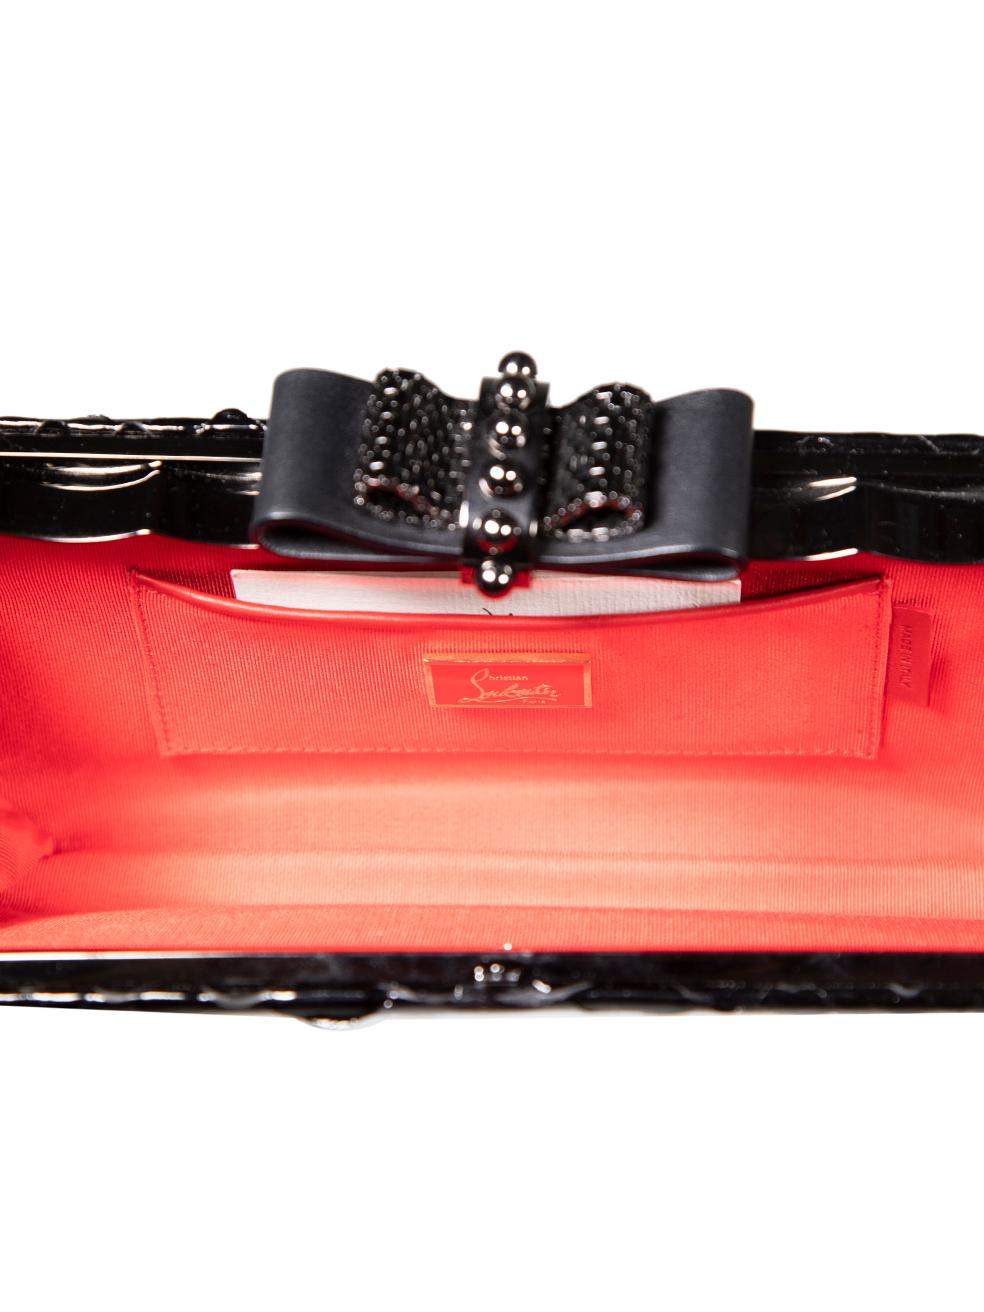 Christian Louboutin Black Python Sweet Charity Clutch For Sale 1